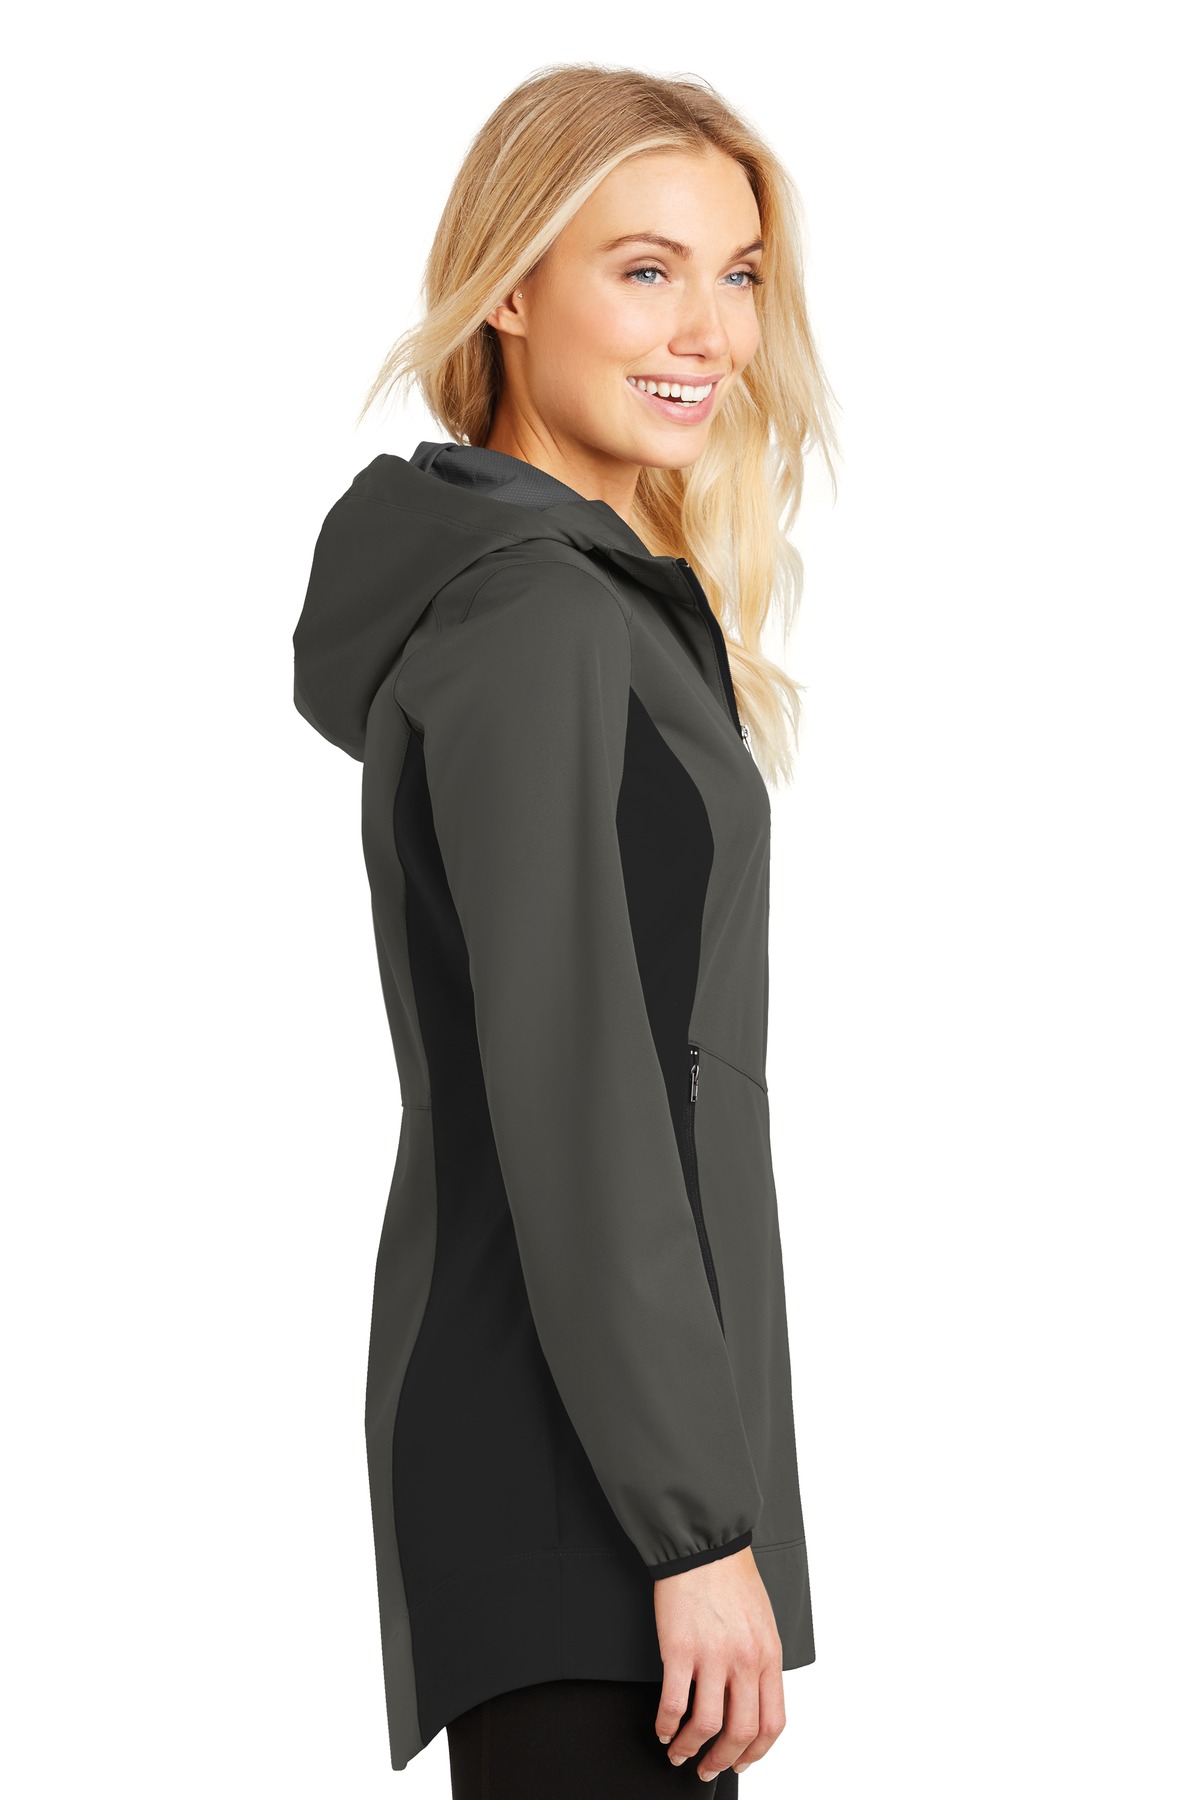 Port Authority Ladies Active Hooded Soft Shell Jacket-L (Grey Steel/ Deep Black) - image 3 of 6